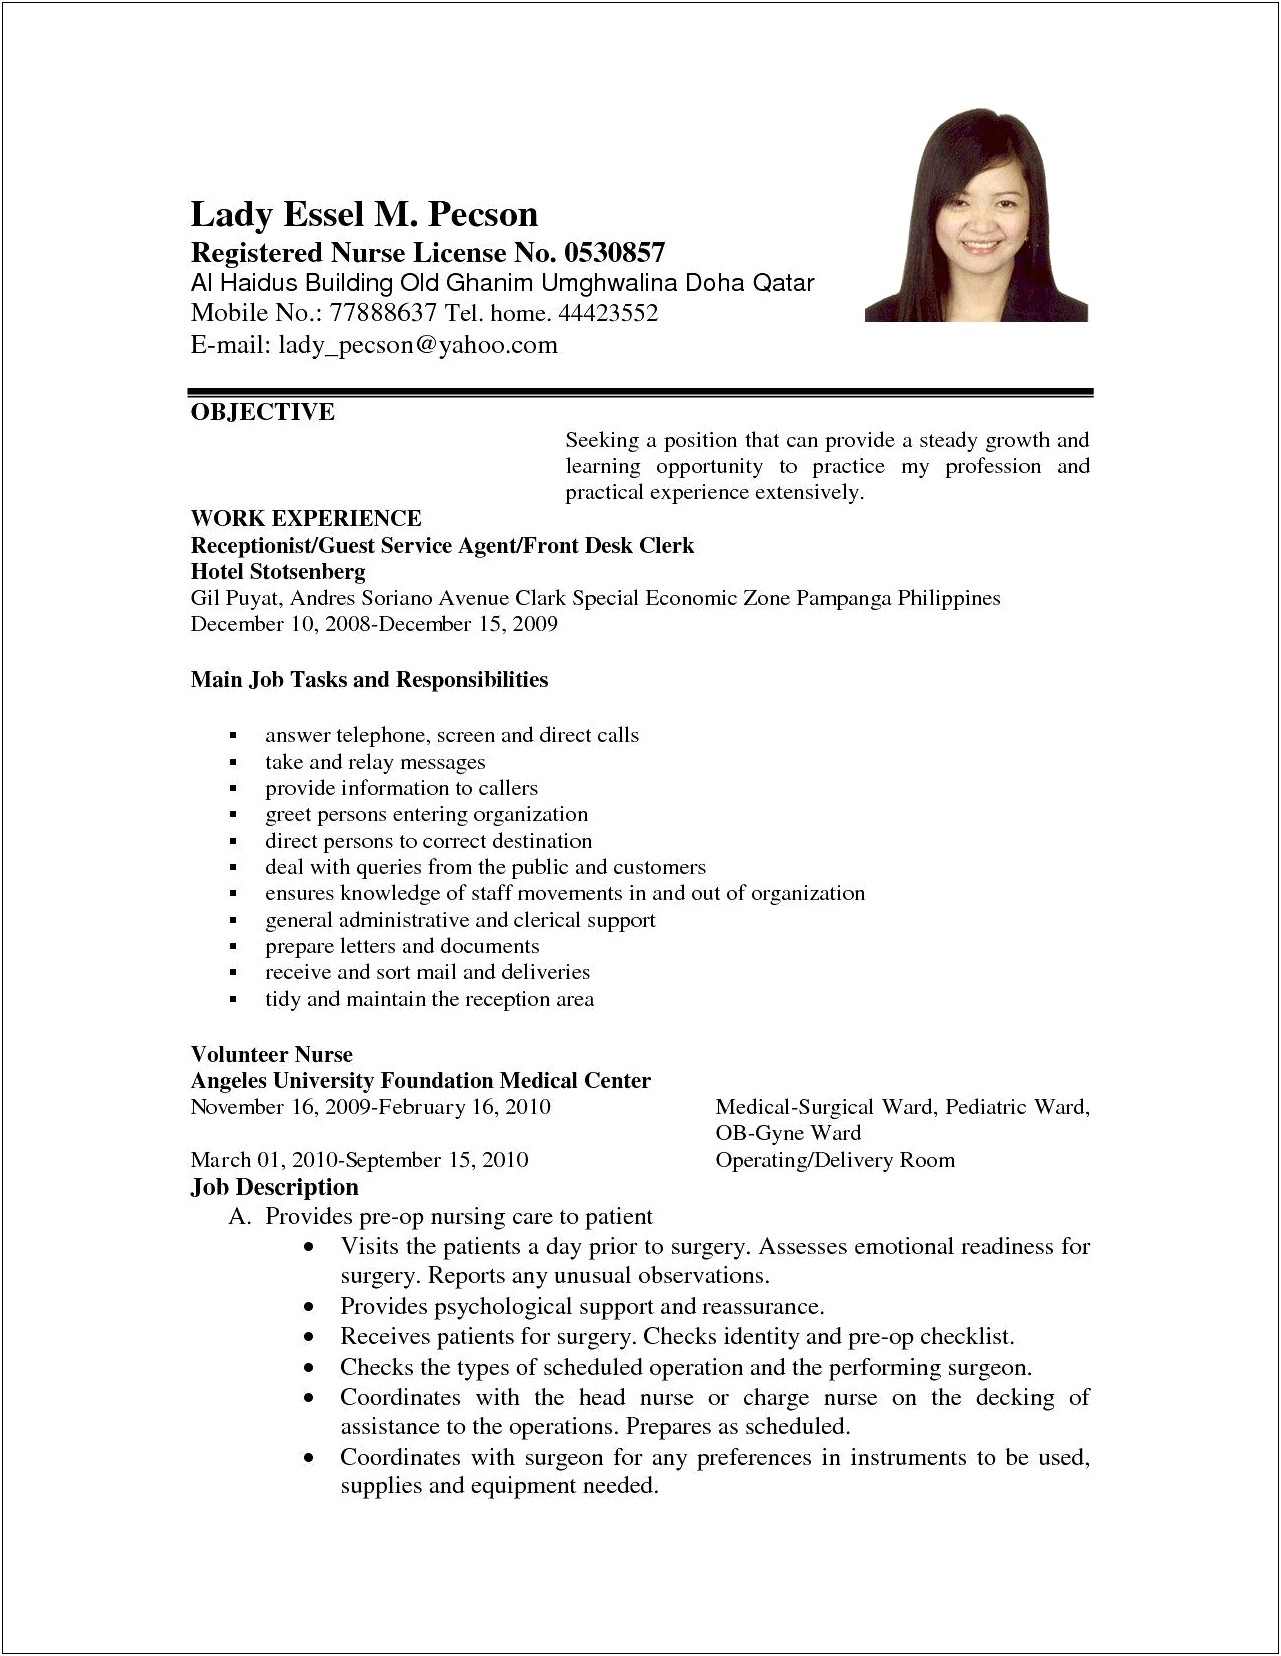 Resume Objective On First Job